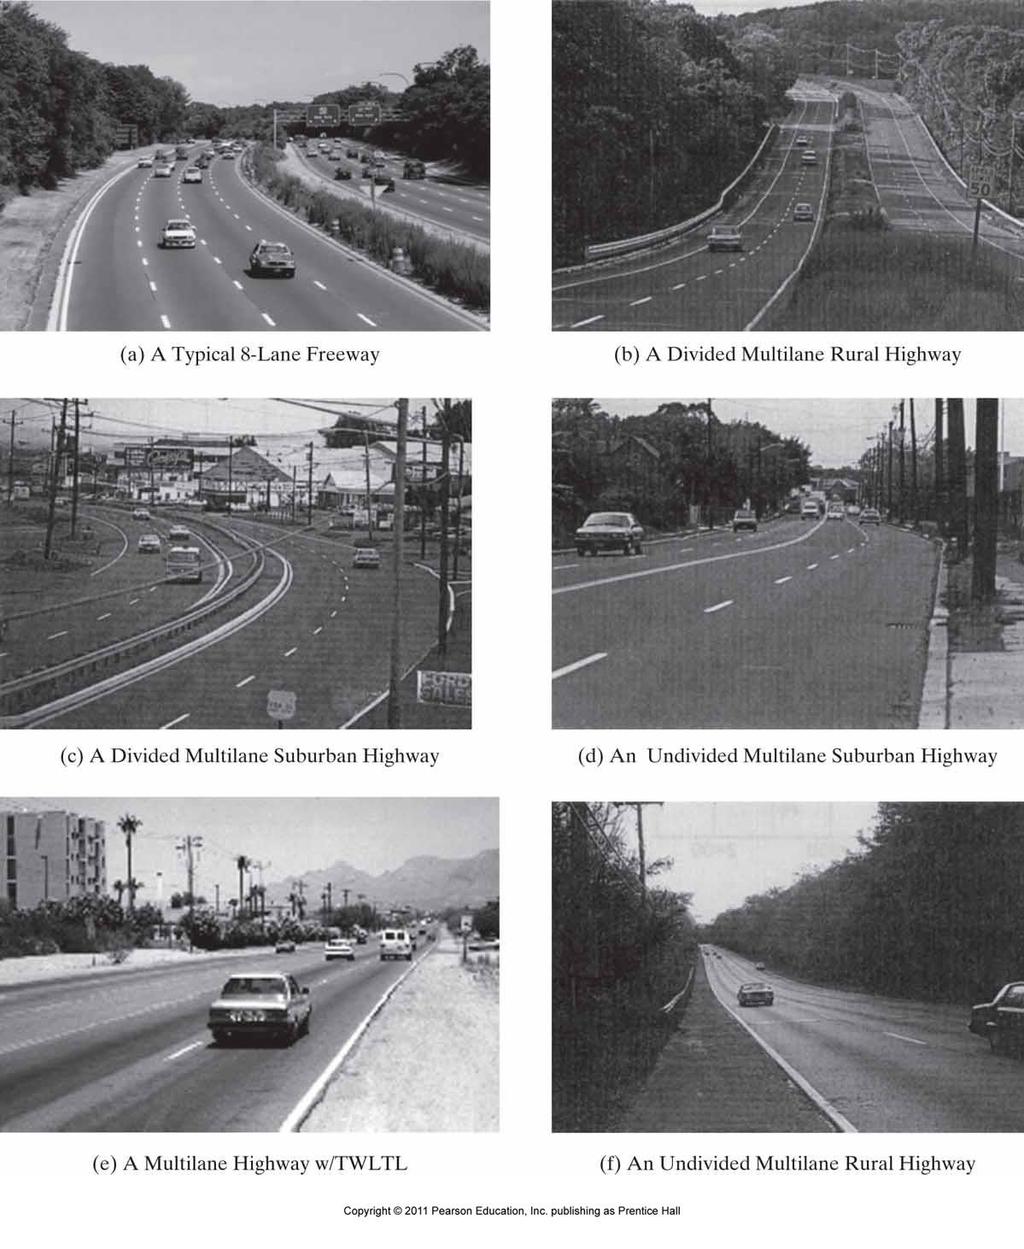 Figure 14.1 Typical Freeway and Multilane Highway Alignments (Sources: Photo (a) courtesy of J.